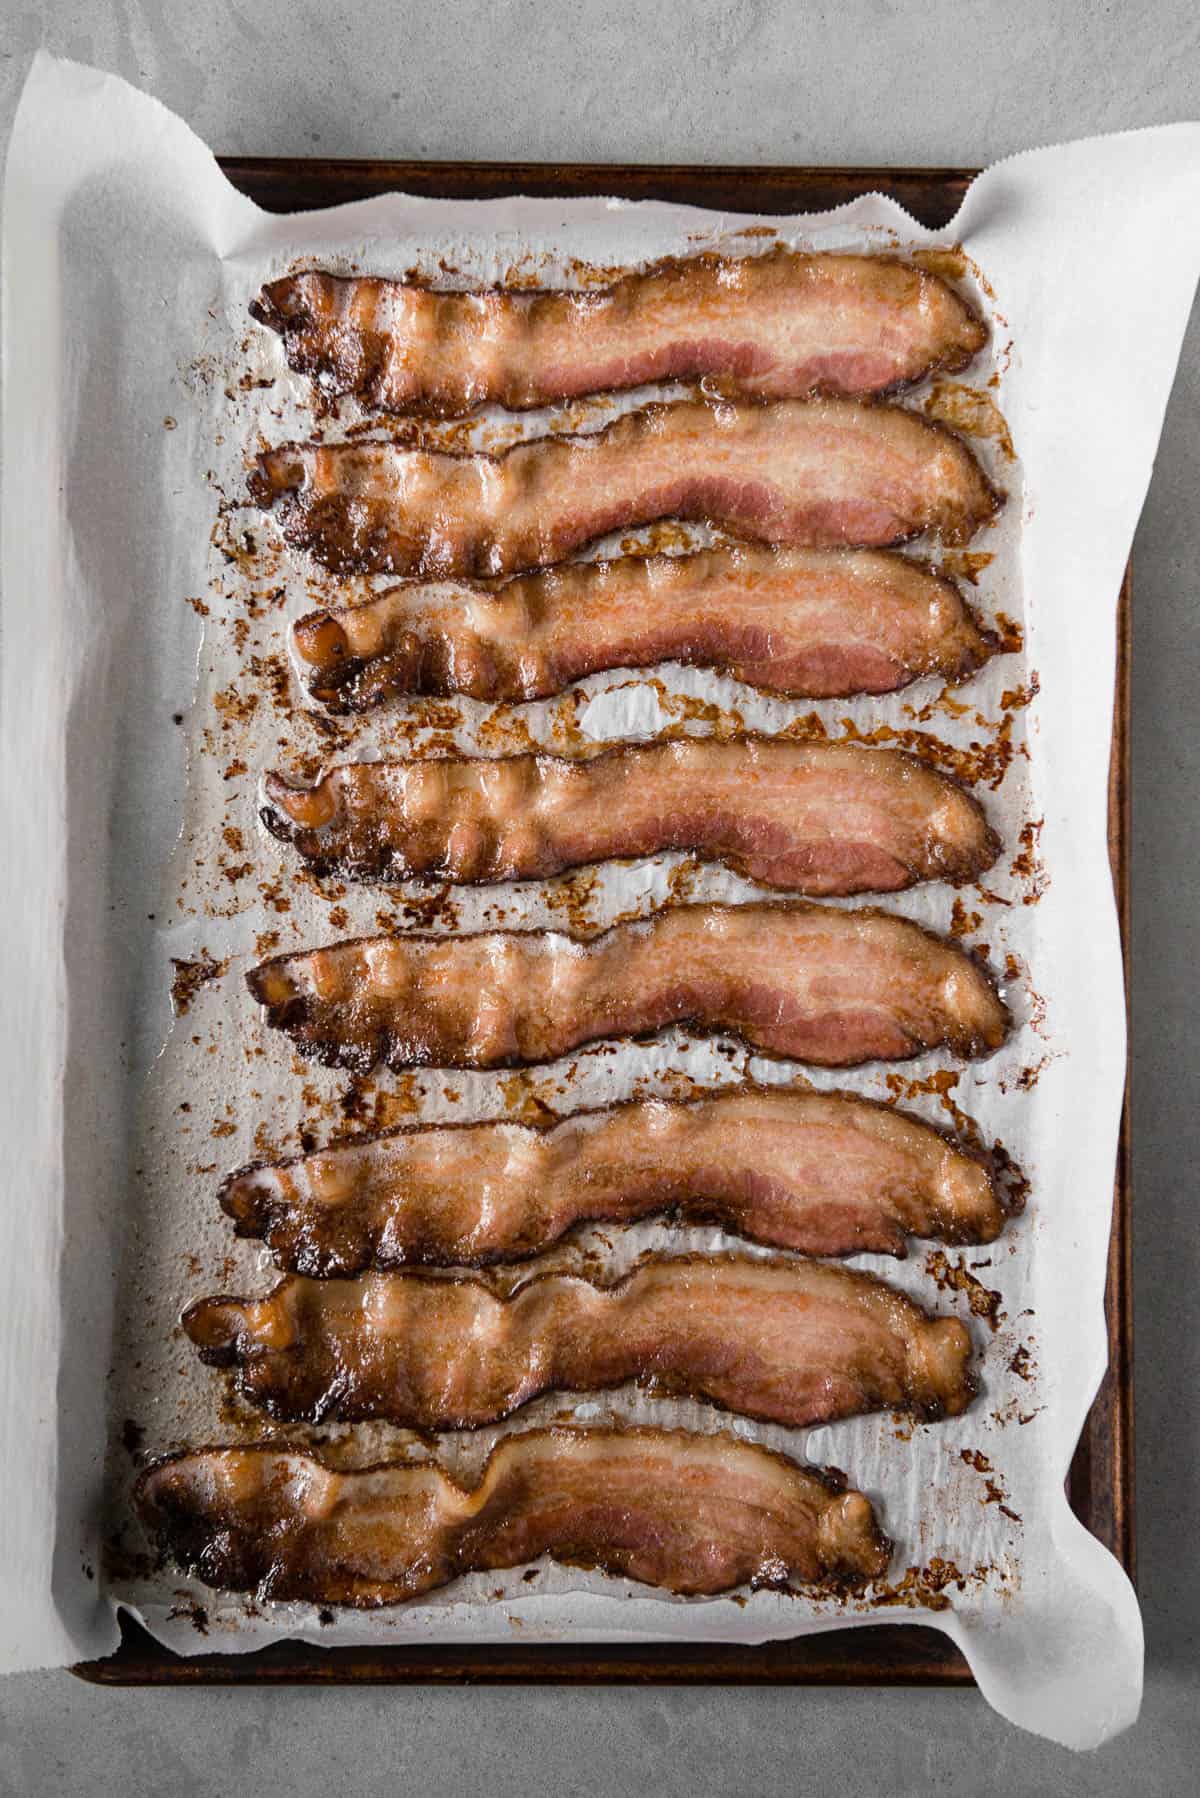 partially cooked bacon slices on parchment lined baking sheet